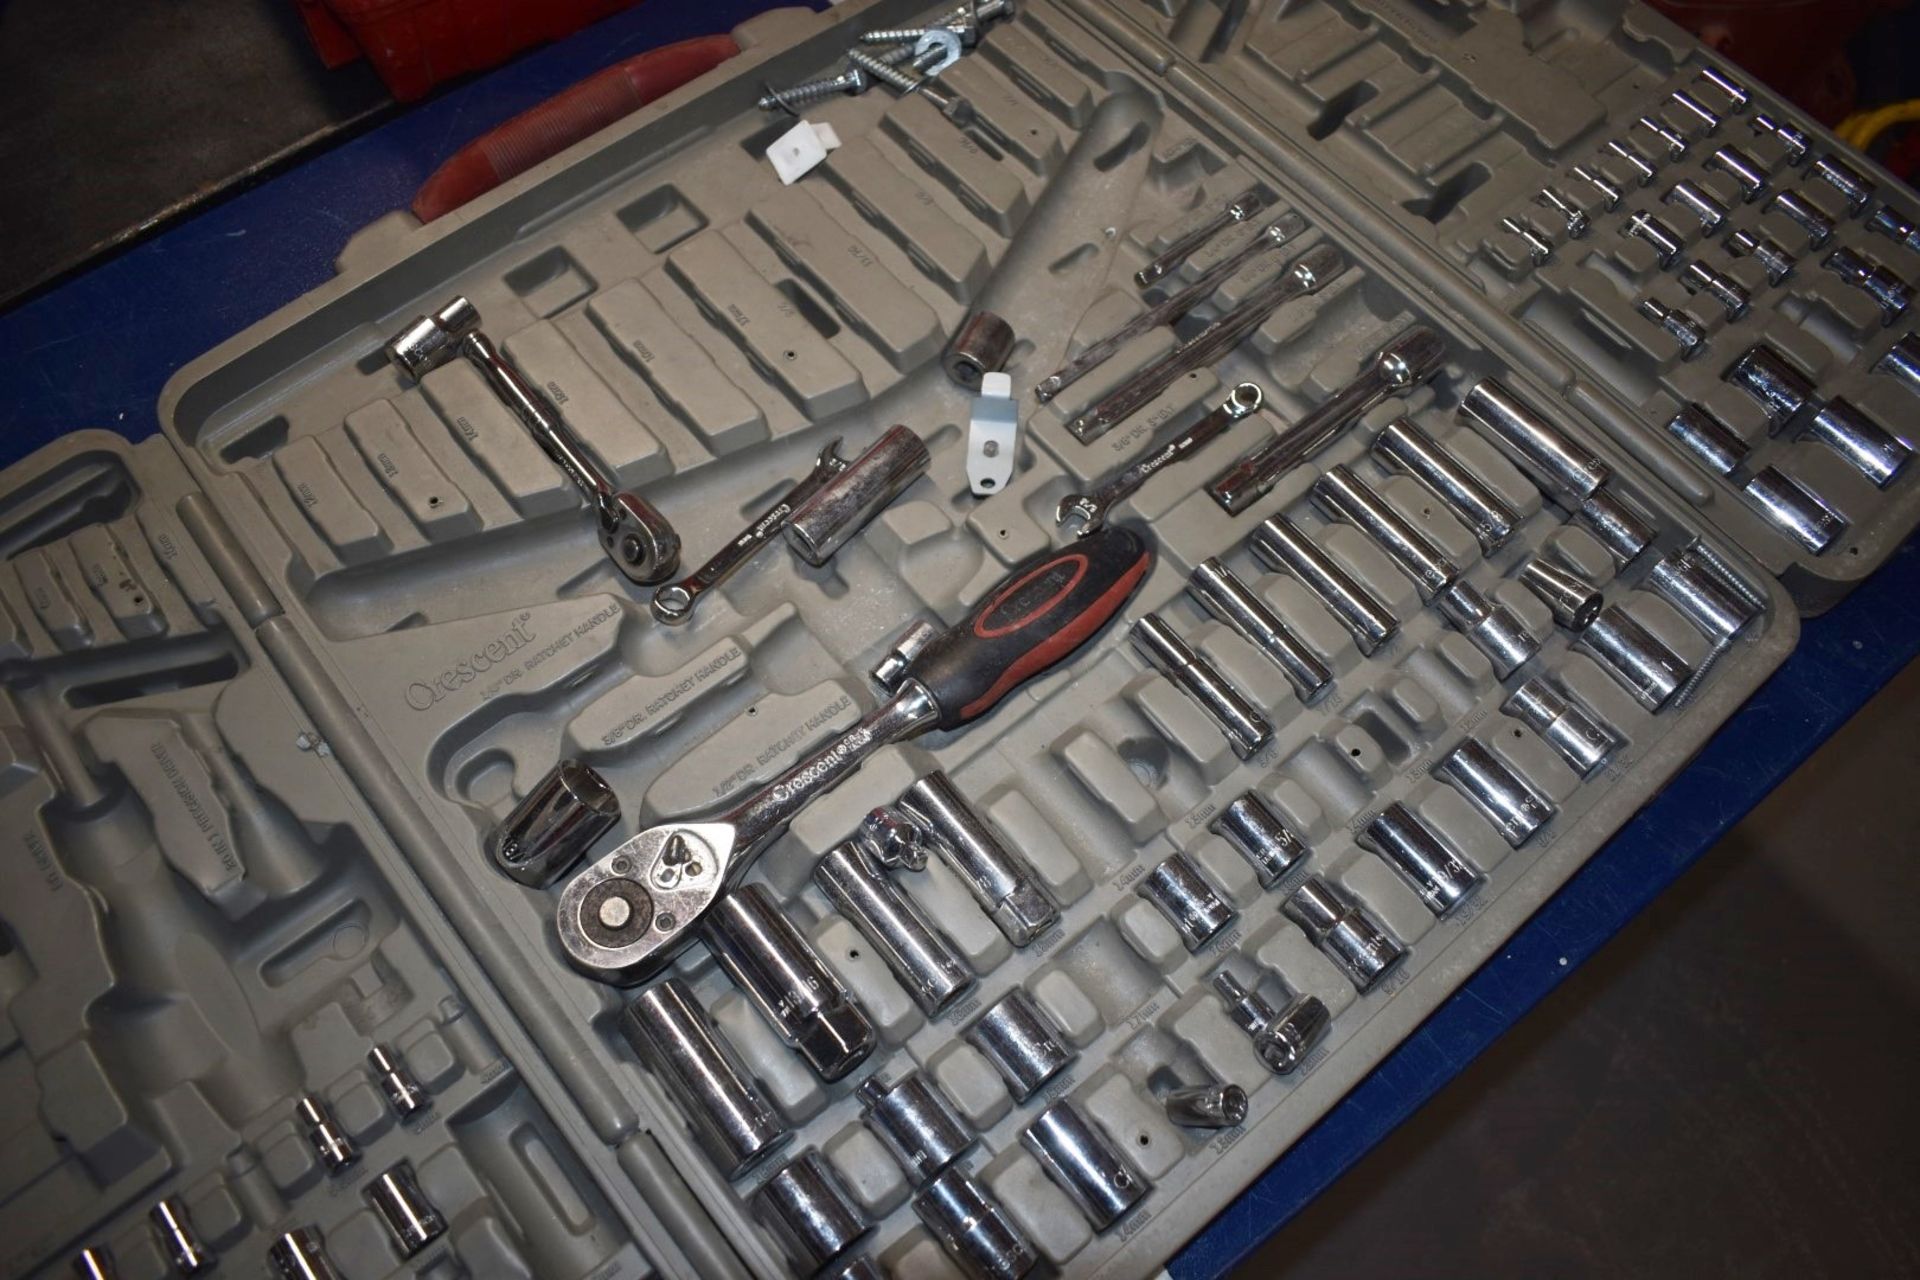 1 x Crescent Socket Wrench Set With Carry Case Incomplete But Contains Approx 70 Pieces